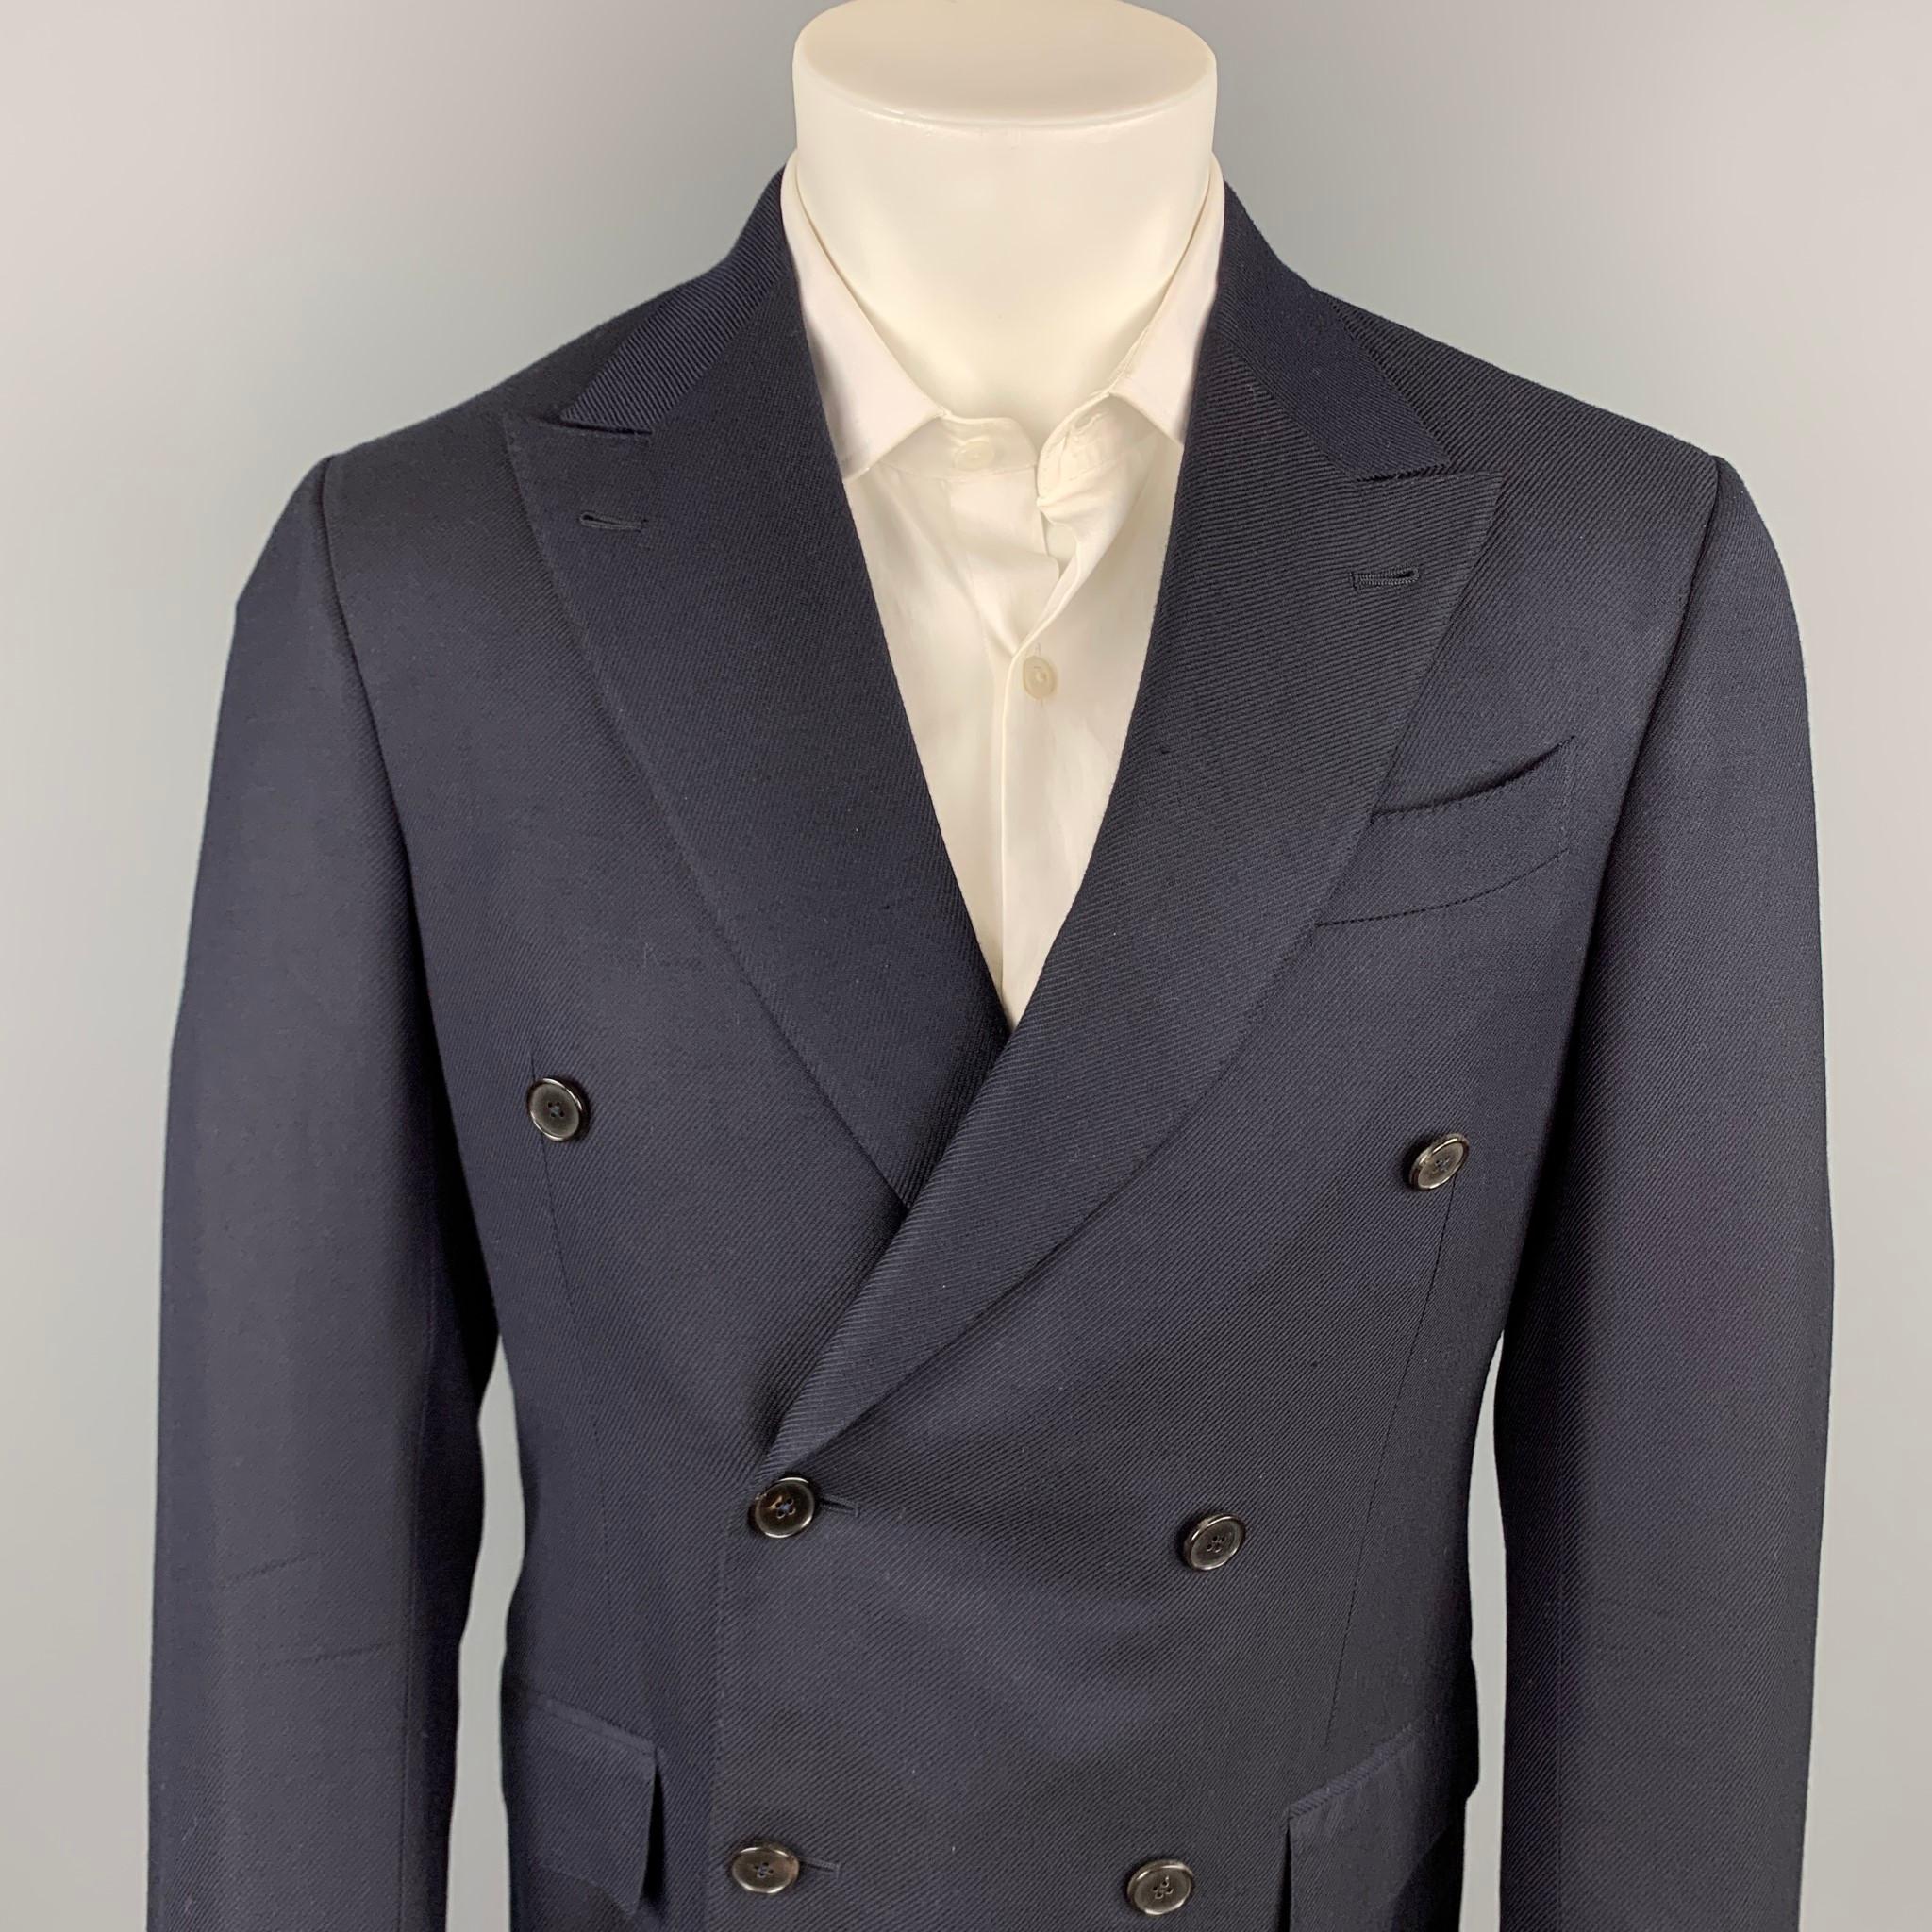 ERMENEGILDO ZEGNA custom sport coat comes in a navy silk / wool with a full liner featuring a peak lapel, flap pockets, and a double breasted closure. Made in Italy.

Very Good Pre-Owned Condition.
Marked: 50 R

Measurements:

Shoulder: 17.5